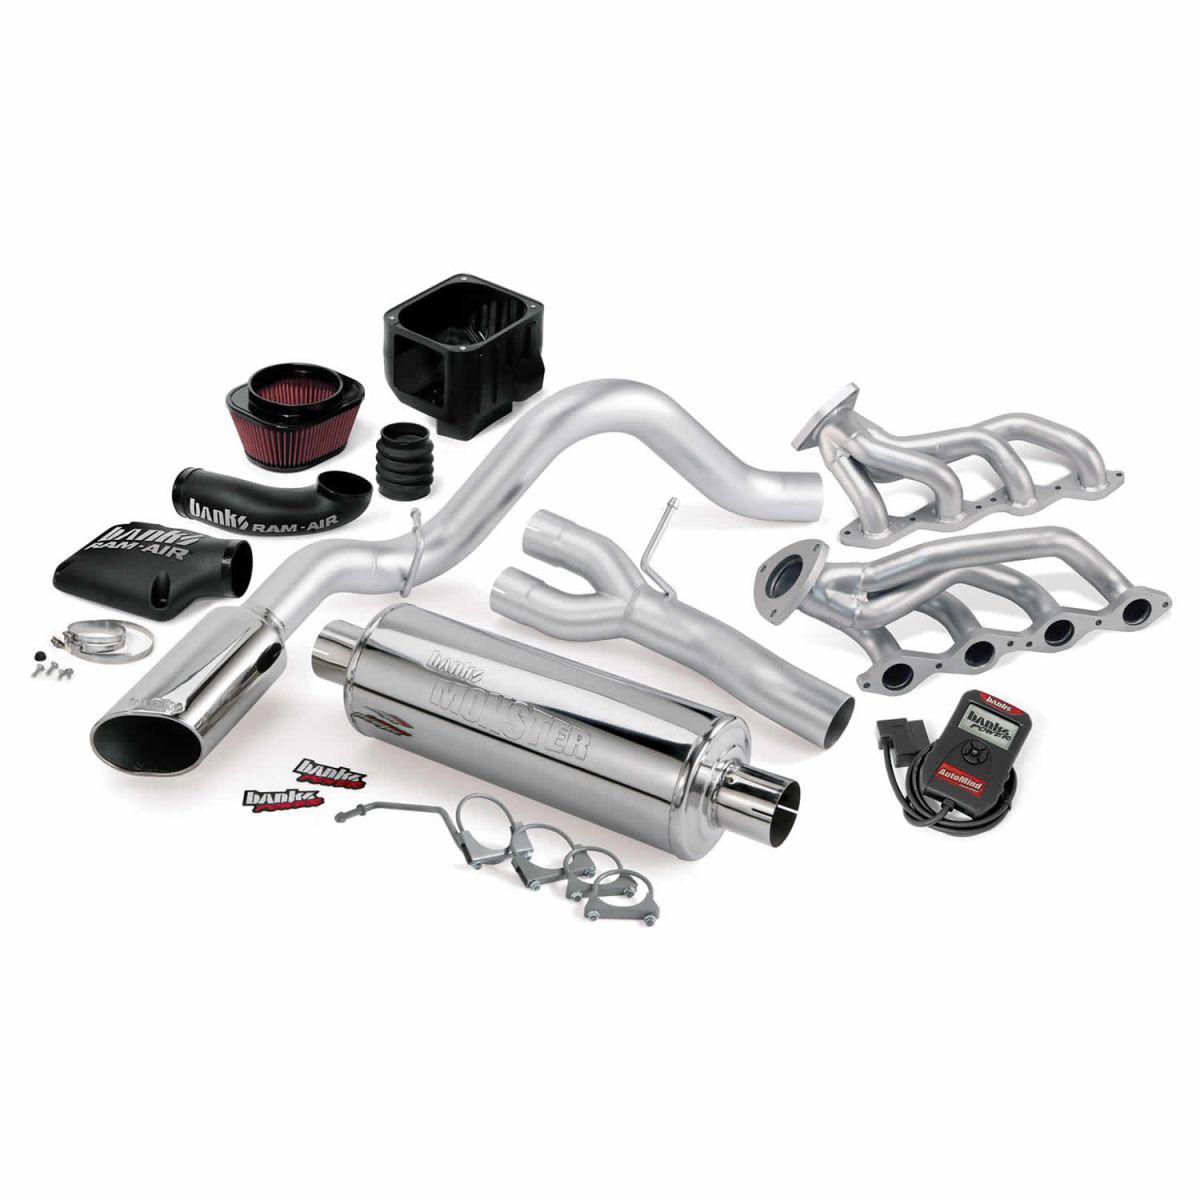 Banks Power - Banks Power PowerPack Bundle Complete Power System W/AutoMind Programmer Chrome Tailpipe 10 Chevy 5.3L ECSB FFV Flex-Fuel Vehicle